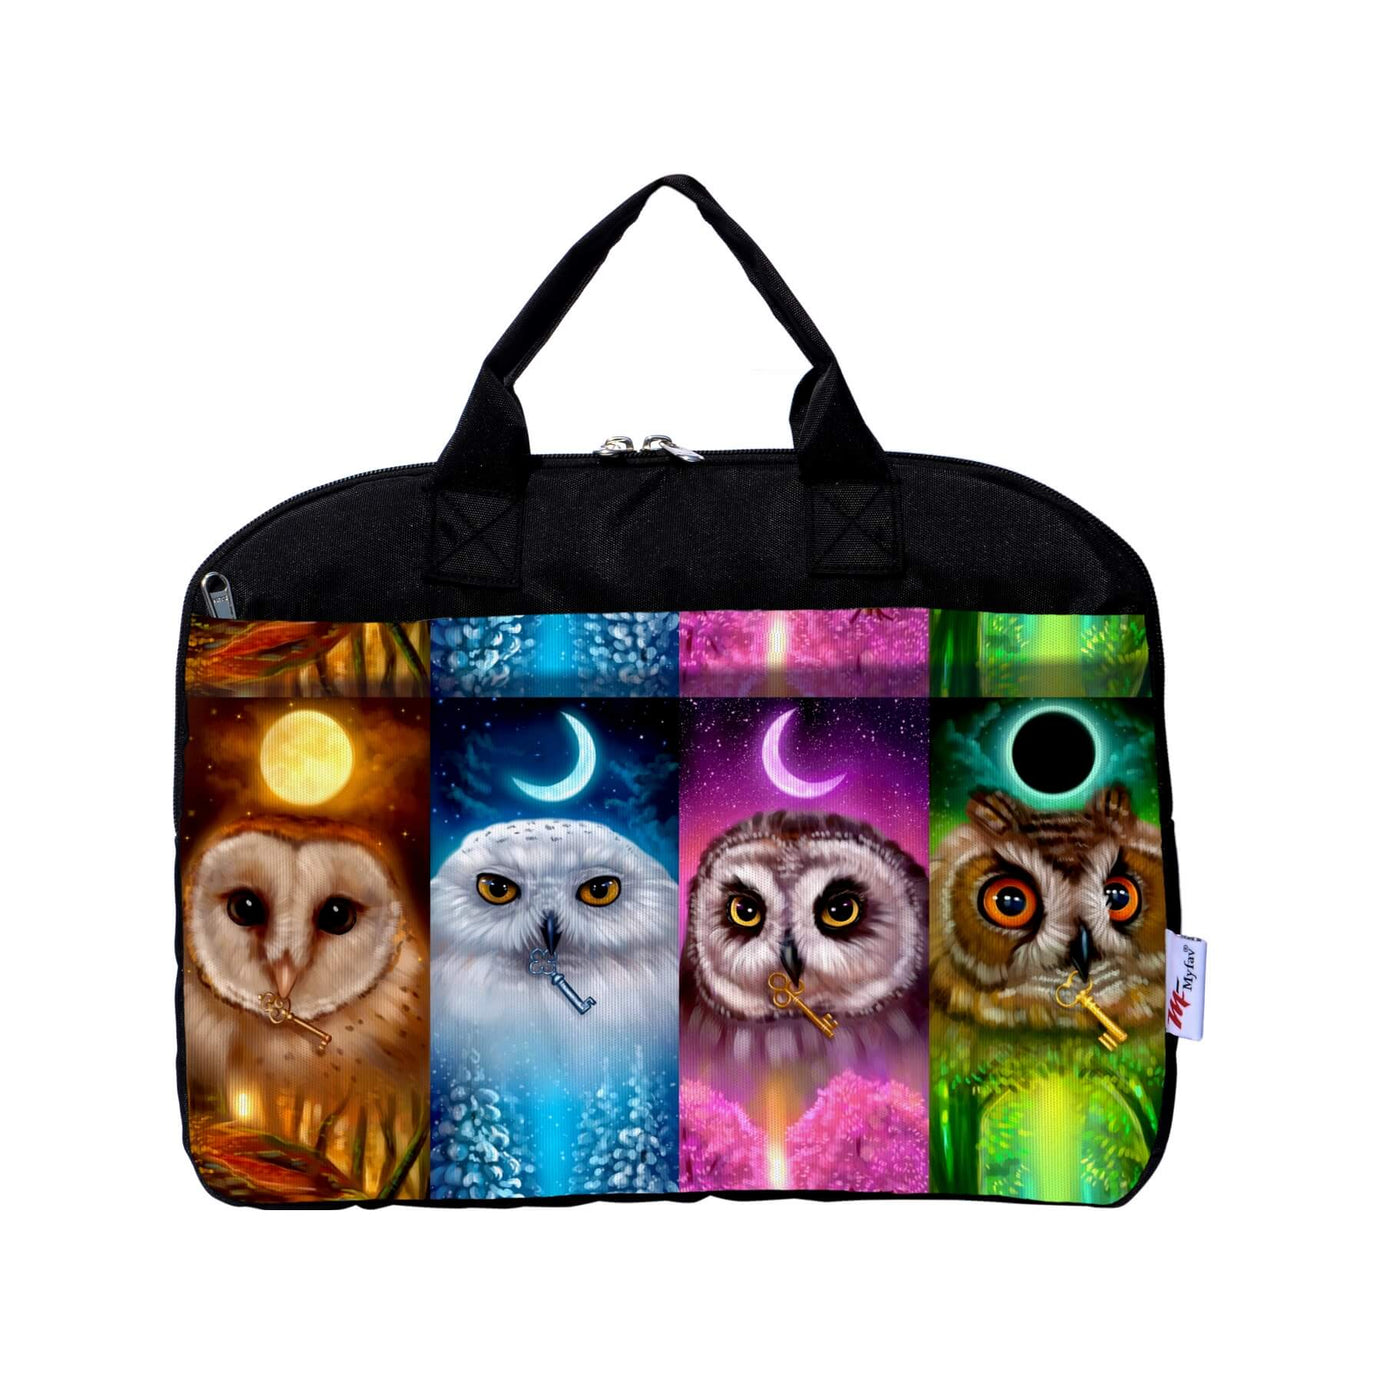 My Fav Owl Print Office Laptop Bag Briefcase 15.6 Inch for Women and Men